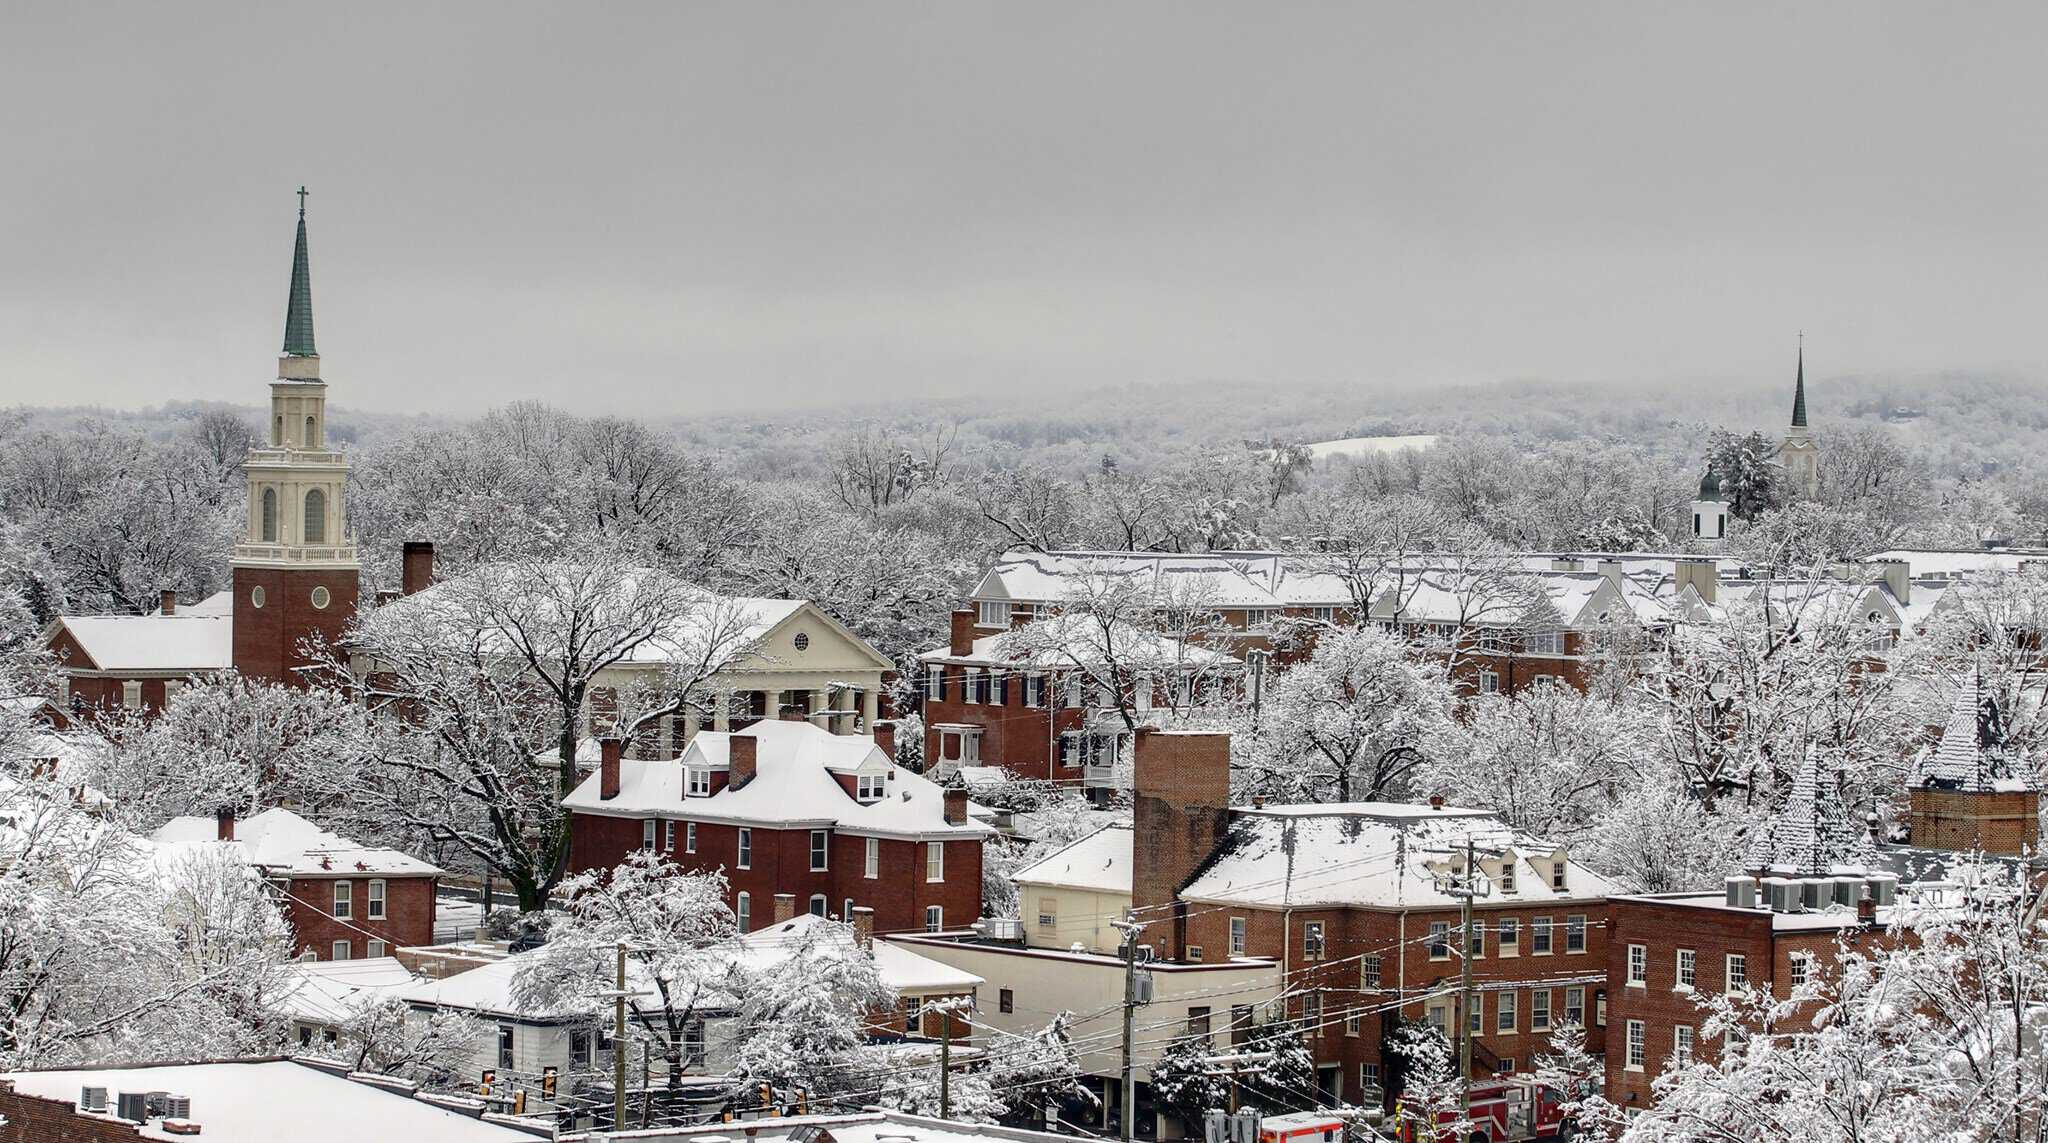 Charlottesville in the snow Enjoying RVA and all it has to offer!